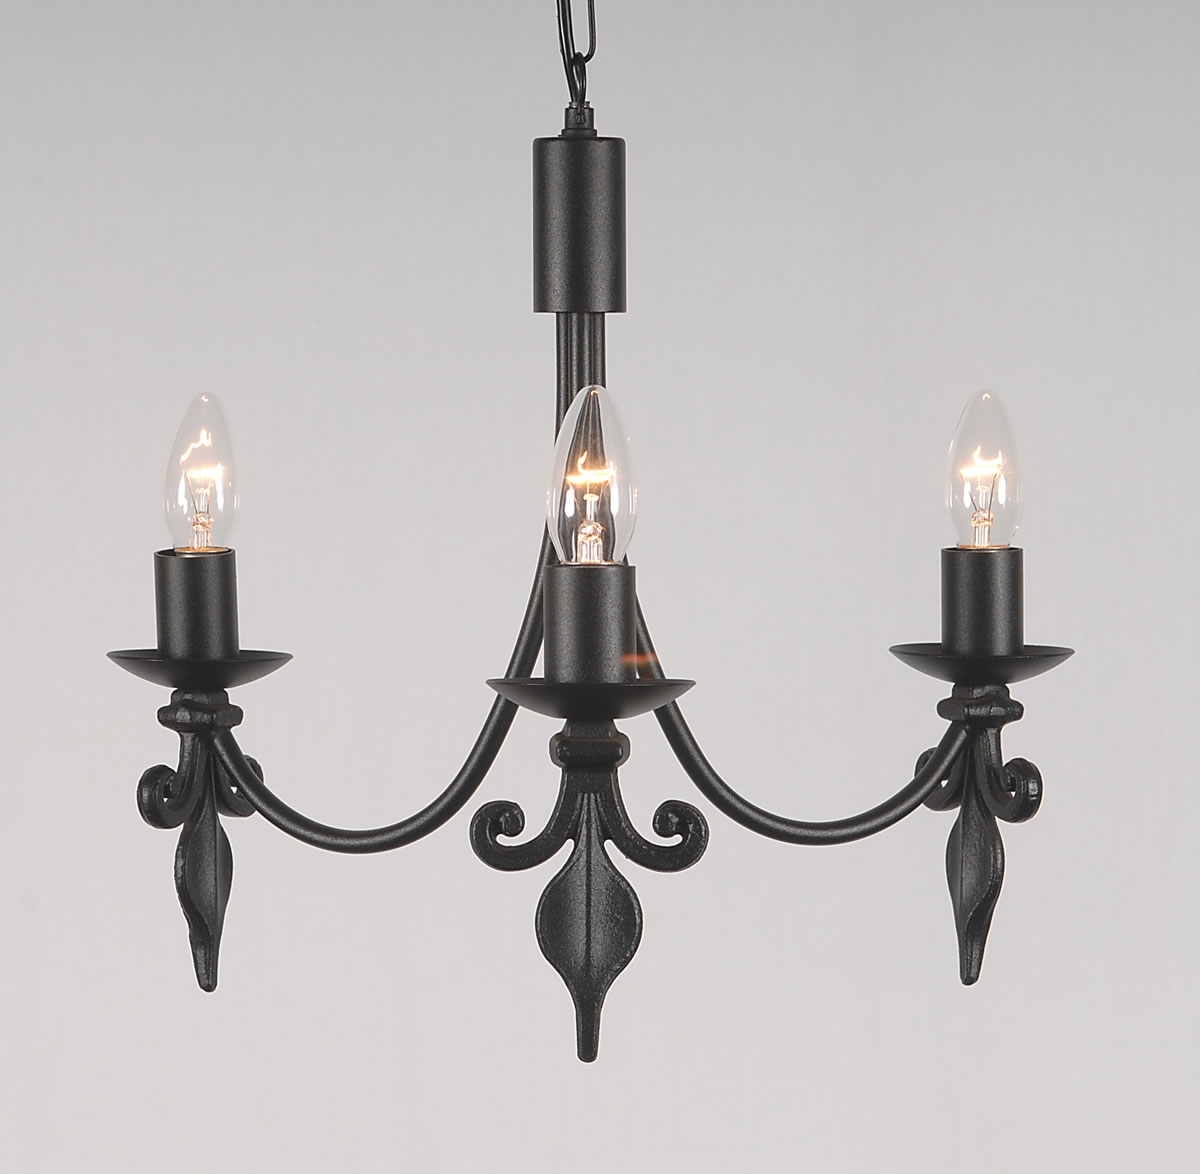 Black Wrought Iron Ceiling Lights